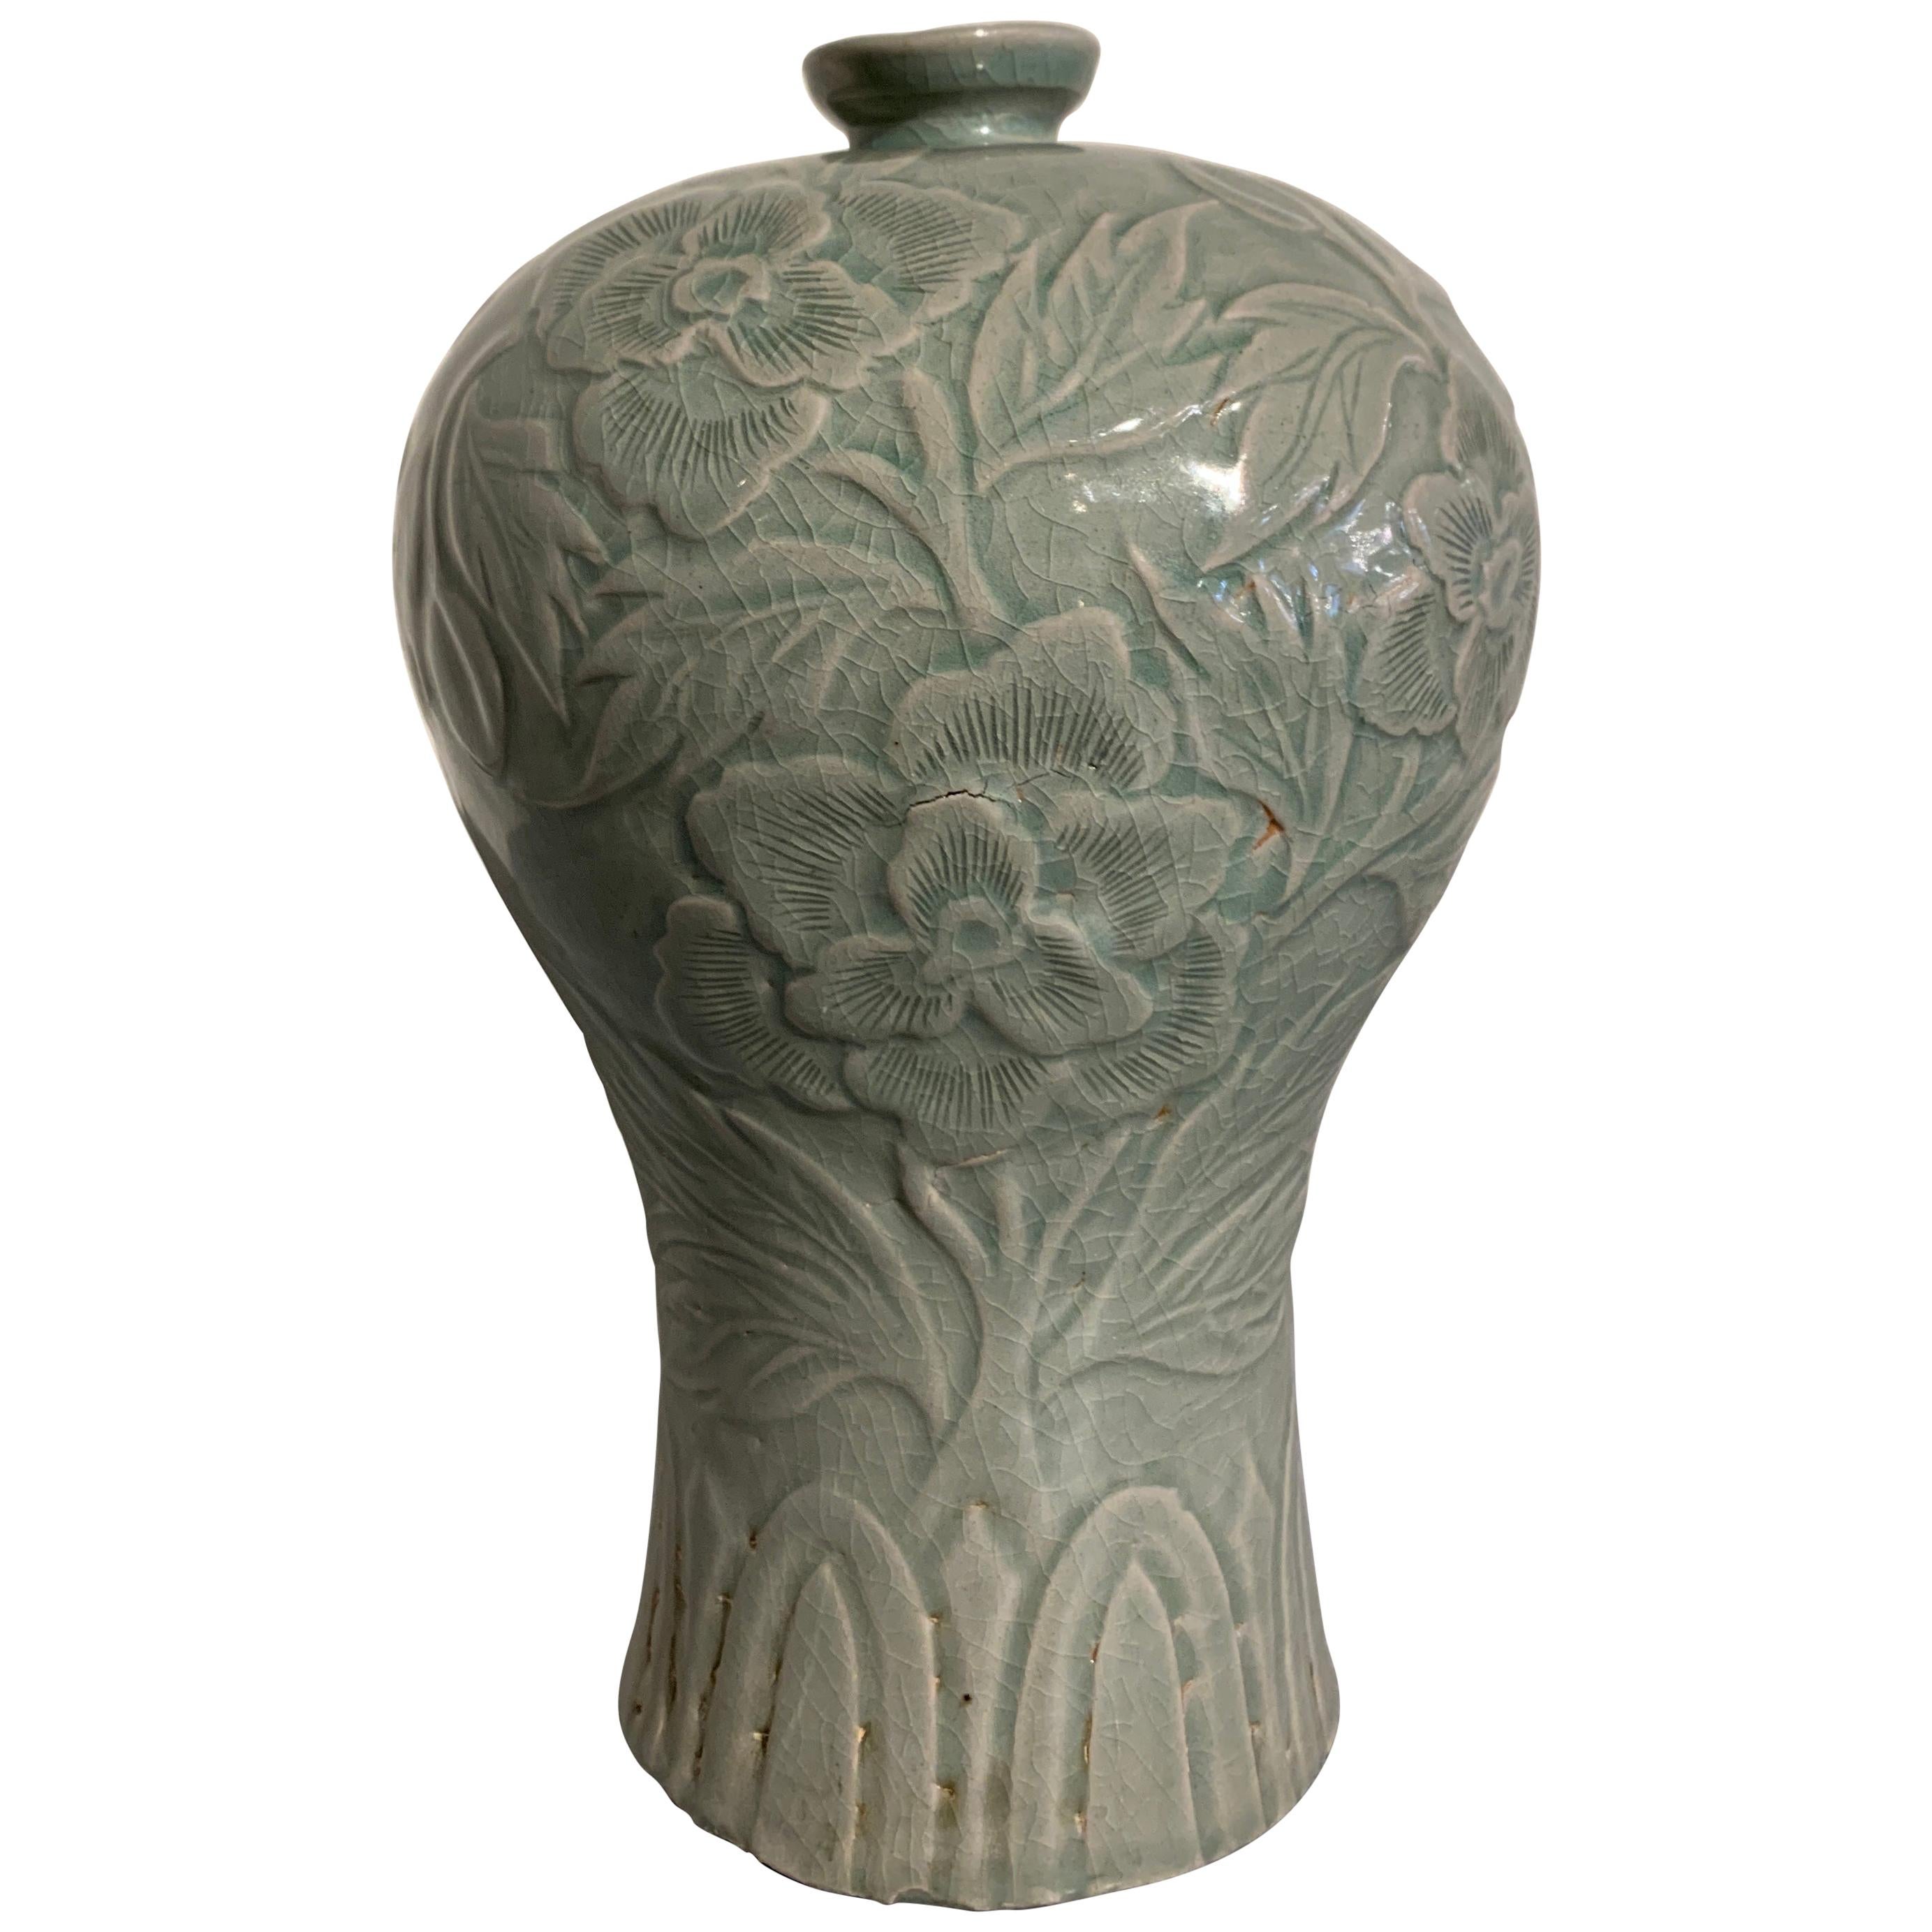 Korean Carved Celadon Vase, Maebyeong, Goryeo Style, Early 20th Century For Sale